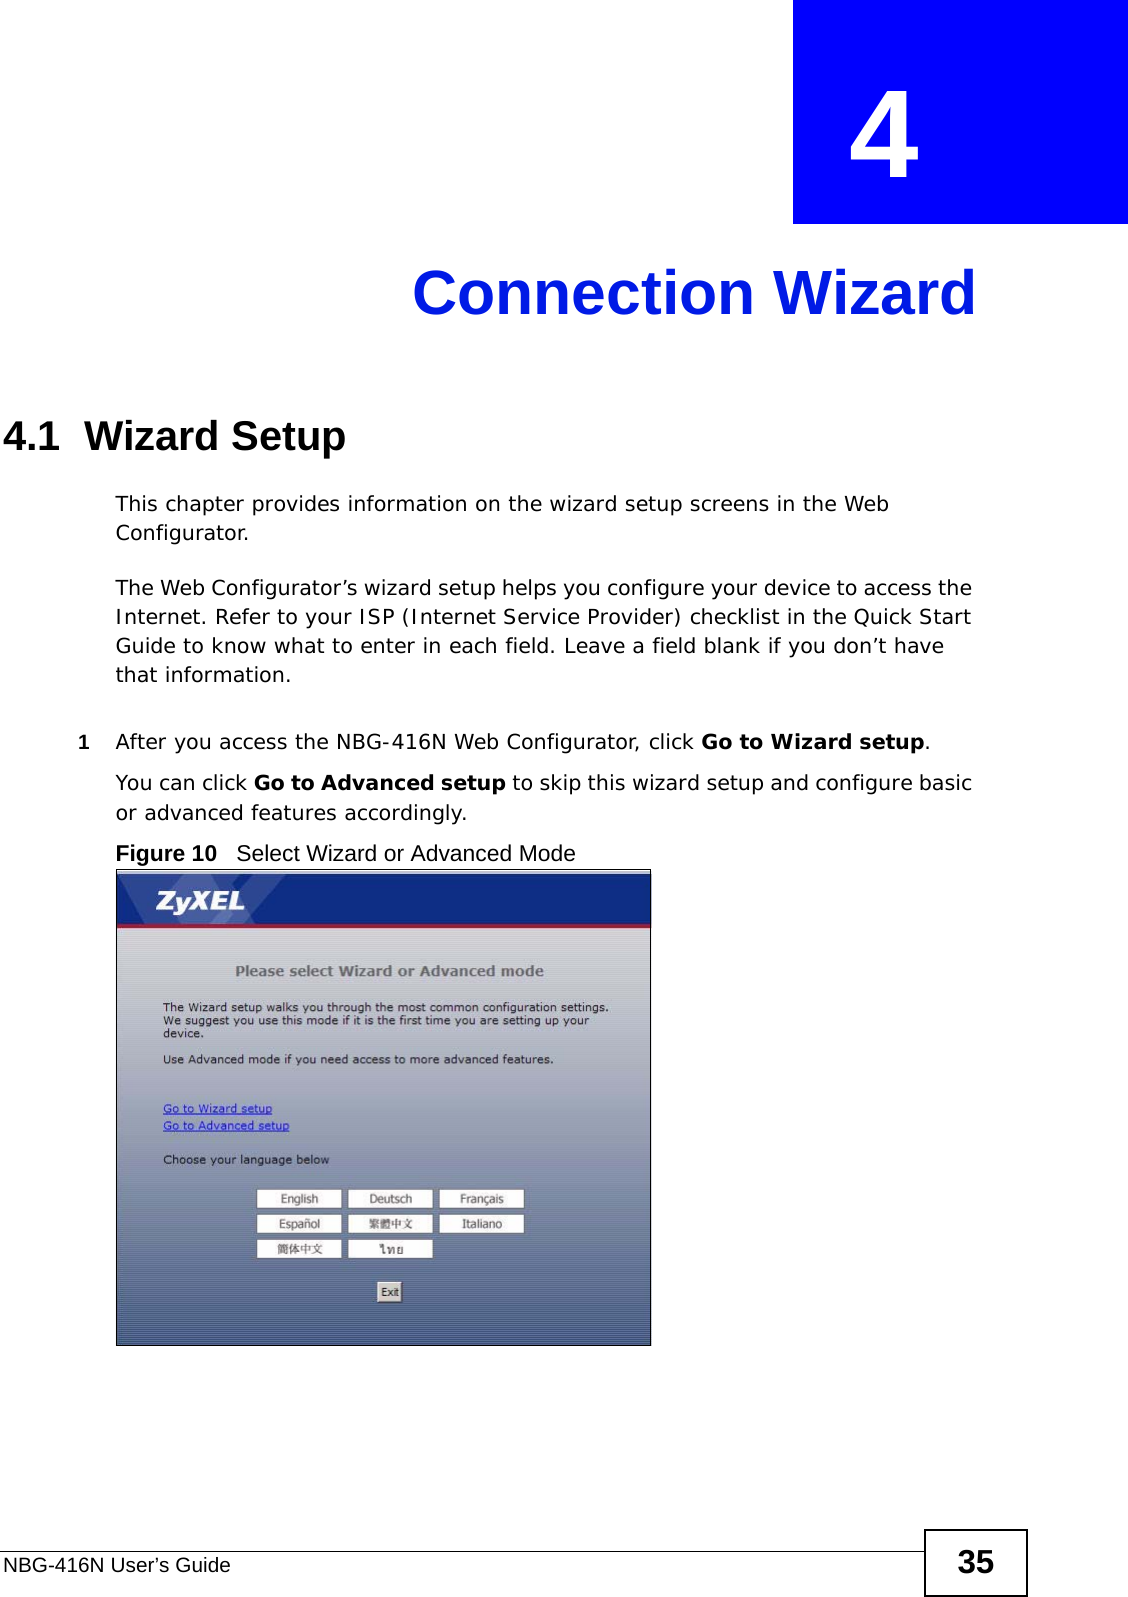 NBG-416N User’s Guide 35CHAPTER  4 Connection Wizard4.1  Wizard SetupThis chapter provides information on the wizard setup screens in the Web Configurator.The Web Configurator’s wizard setup helps you configure your device to access the Internet. Refer to your ISP (Internet Service Provider) checklist in the Quick Start Guide to know what to enter in each field. Leave a field blank if you don’t have that information.1After you access the NBG-416N Web Configurator, click Go to Wizard setup.You can click Go to Advanced setup to skip this wizard setup and configure basic or advanced features accordingly.Figure 10   Select Wizard or Advanced Mode